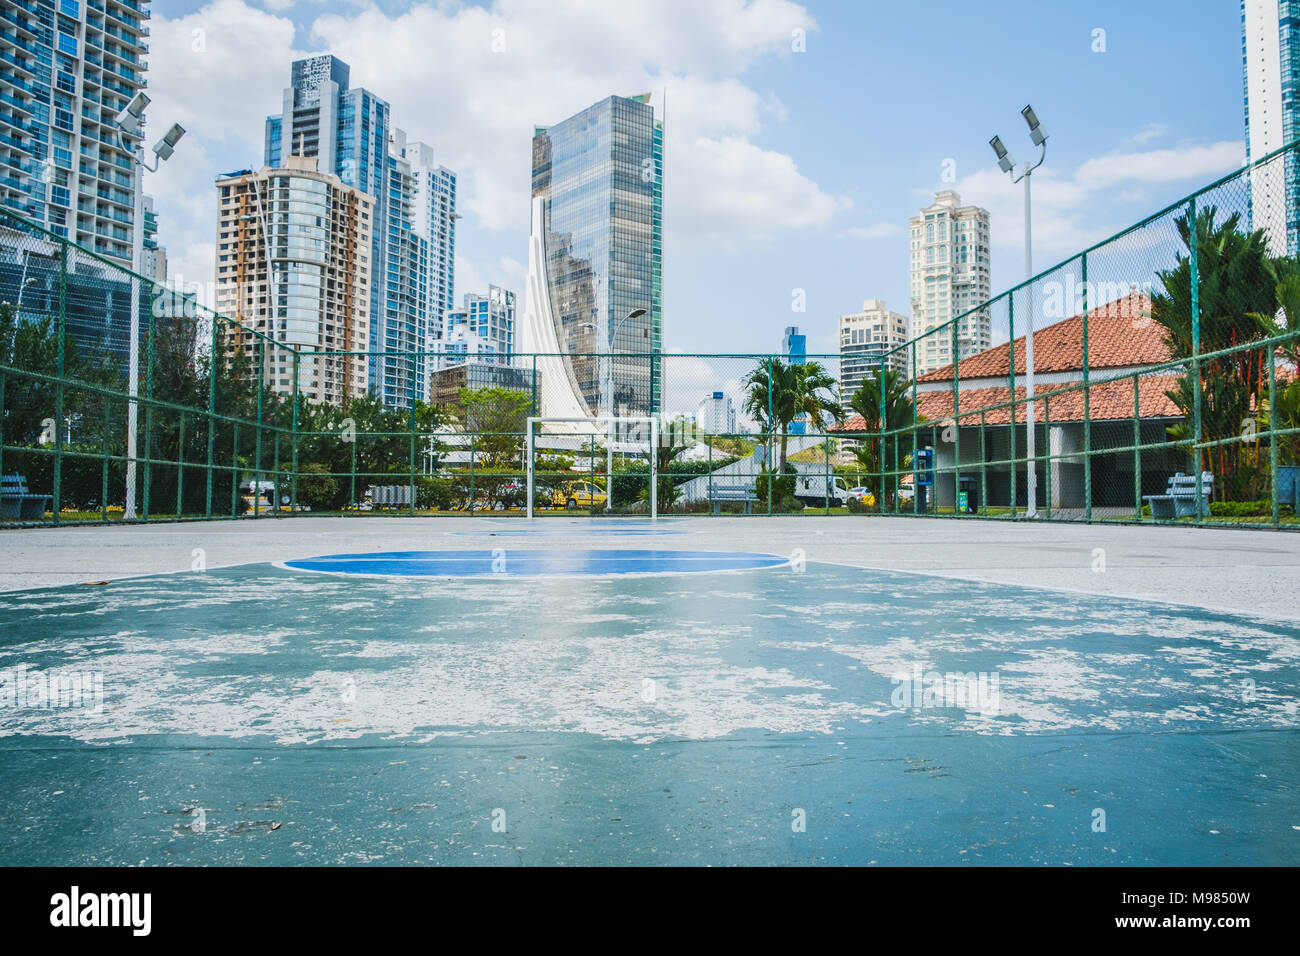 Basketball field in Panama City  - sports field in outdoor park with city skyline Stock Photo